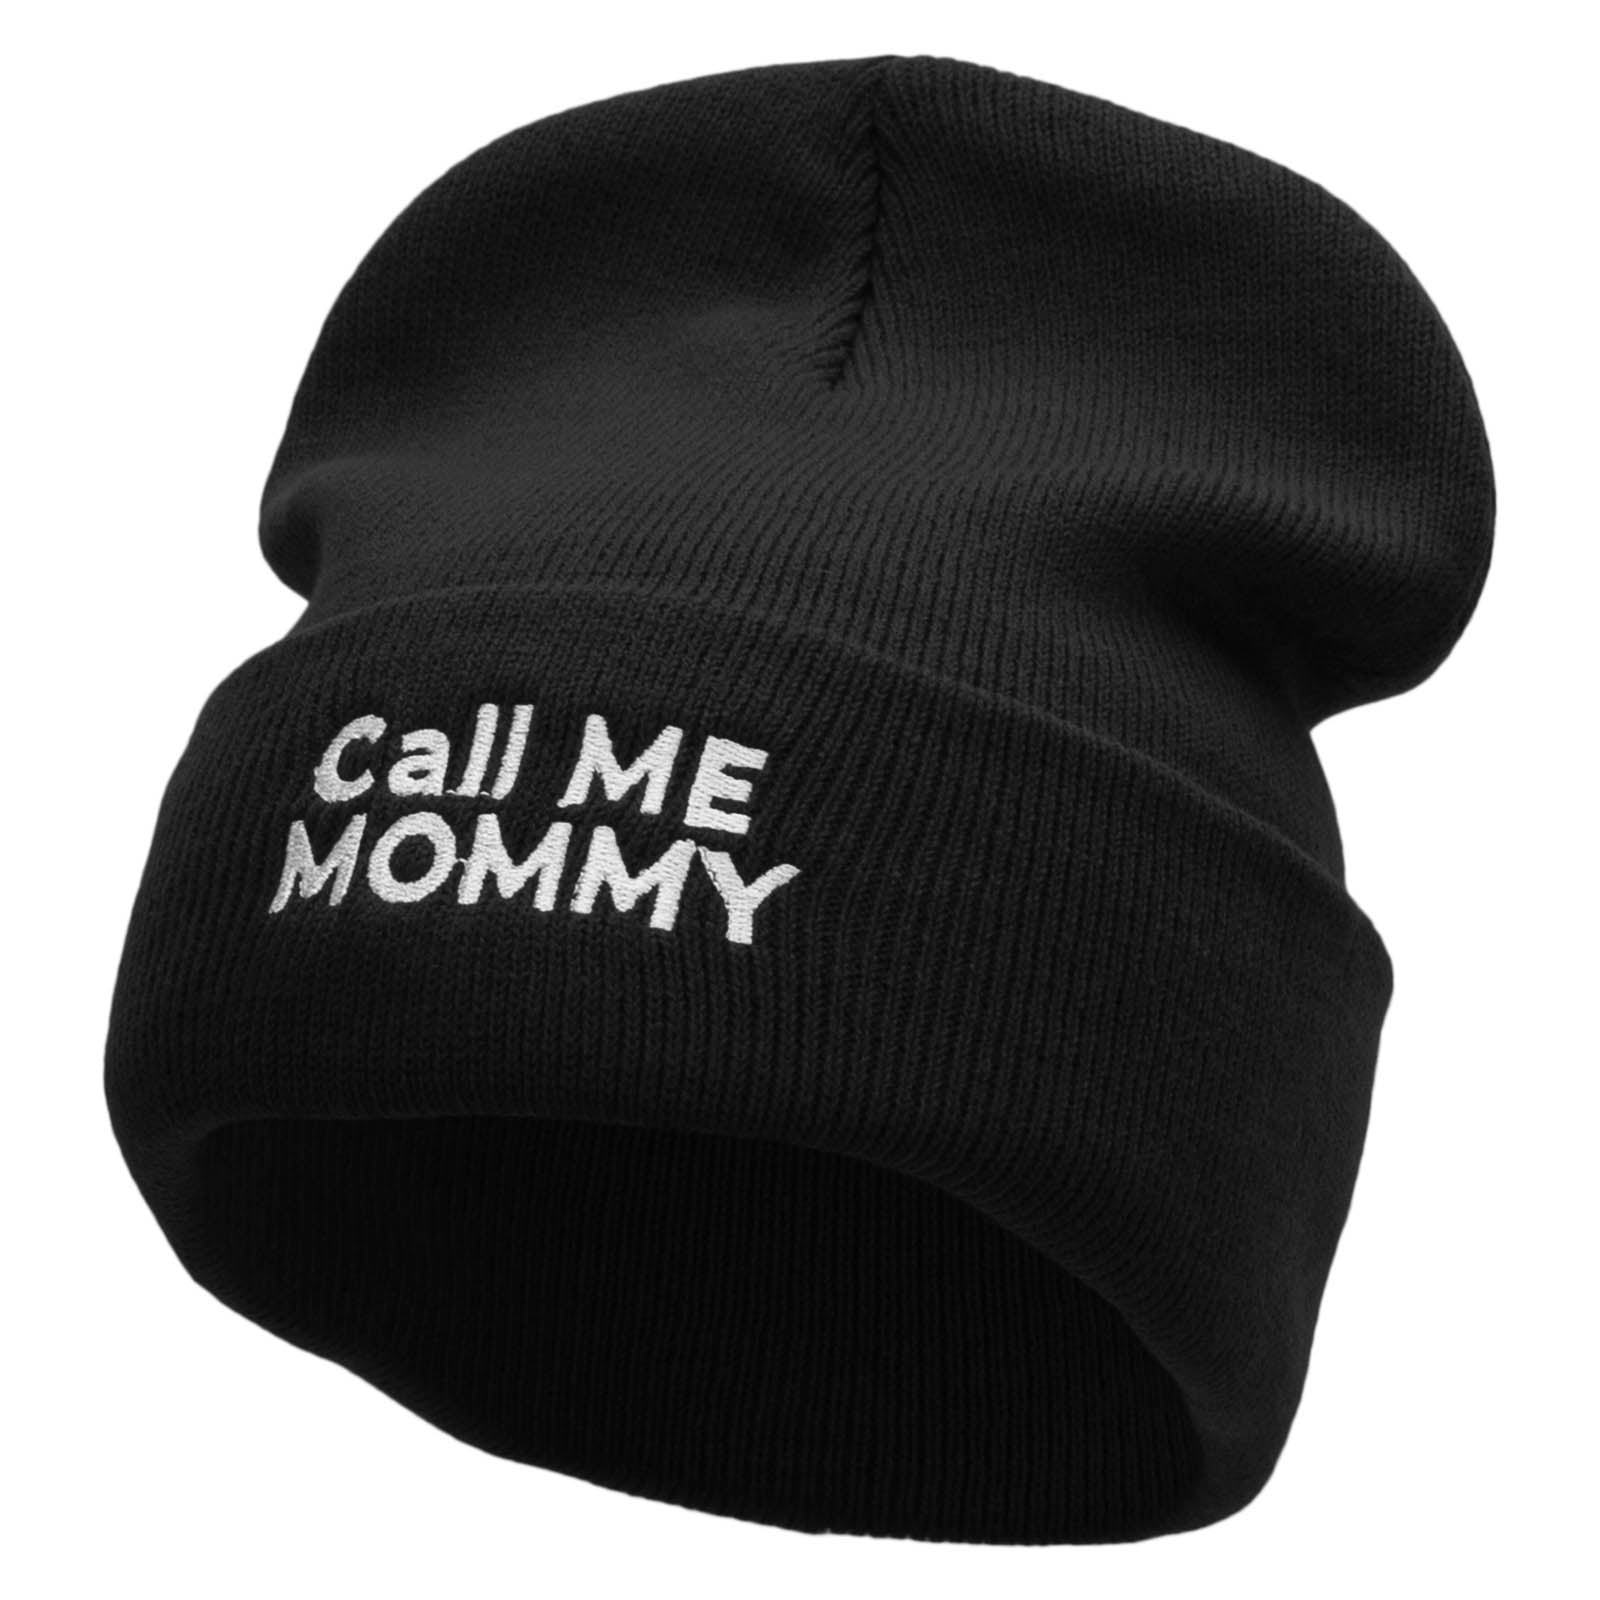 Call Me Mommy Embroidered 12 Inch Long Knitted Beanie - Black OSFM